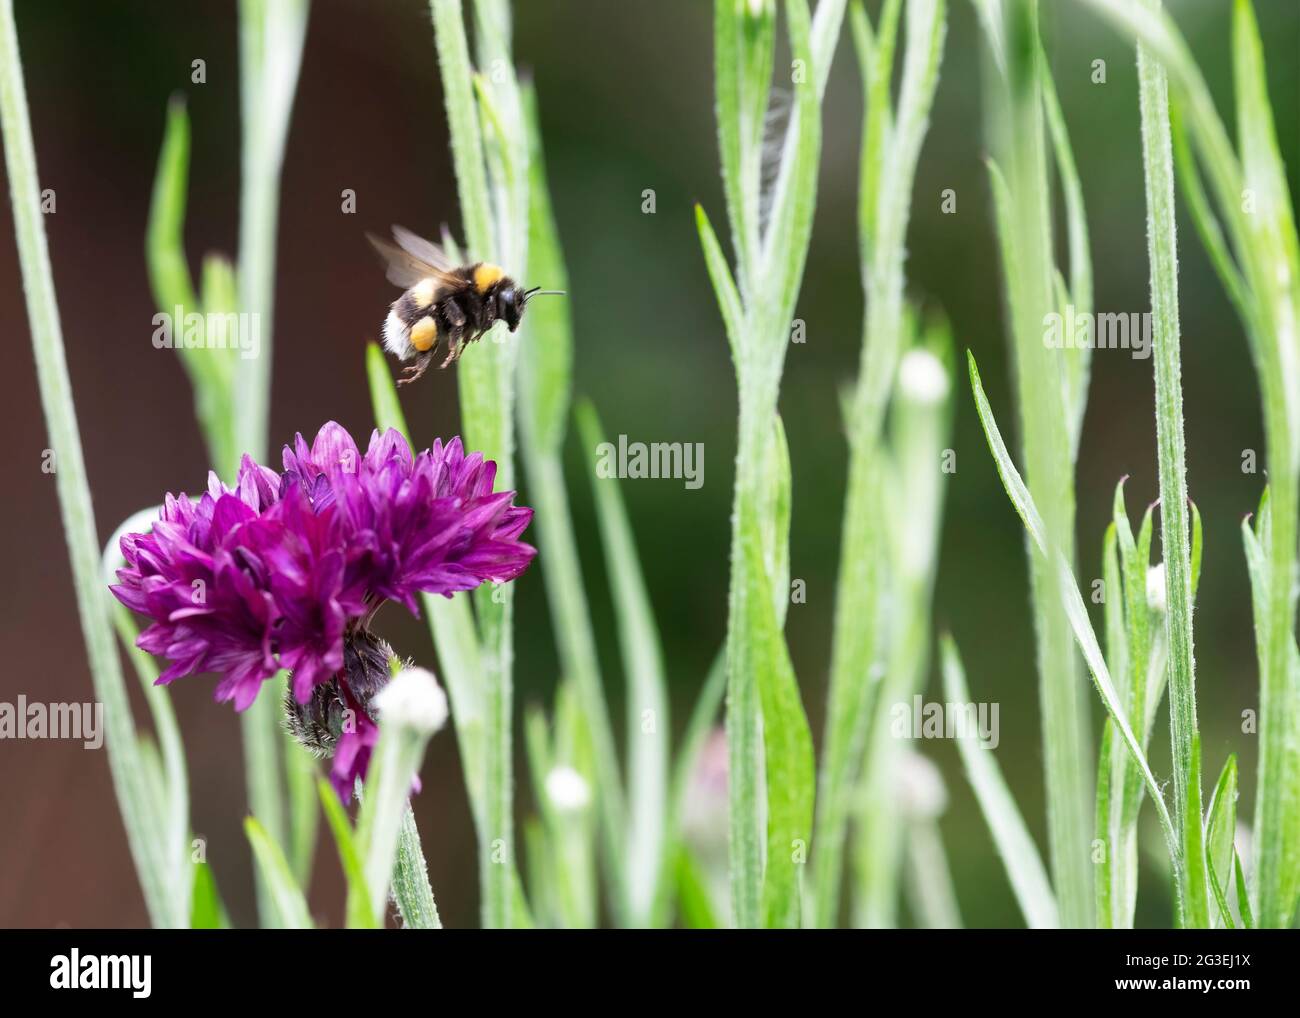 concept of bees in danger of extinction due to changes in their environment, showing a bumblebee in flight near a flower, collective focus blurred bac Stock Photo